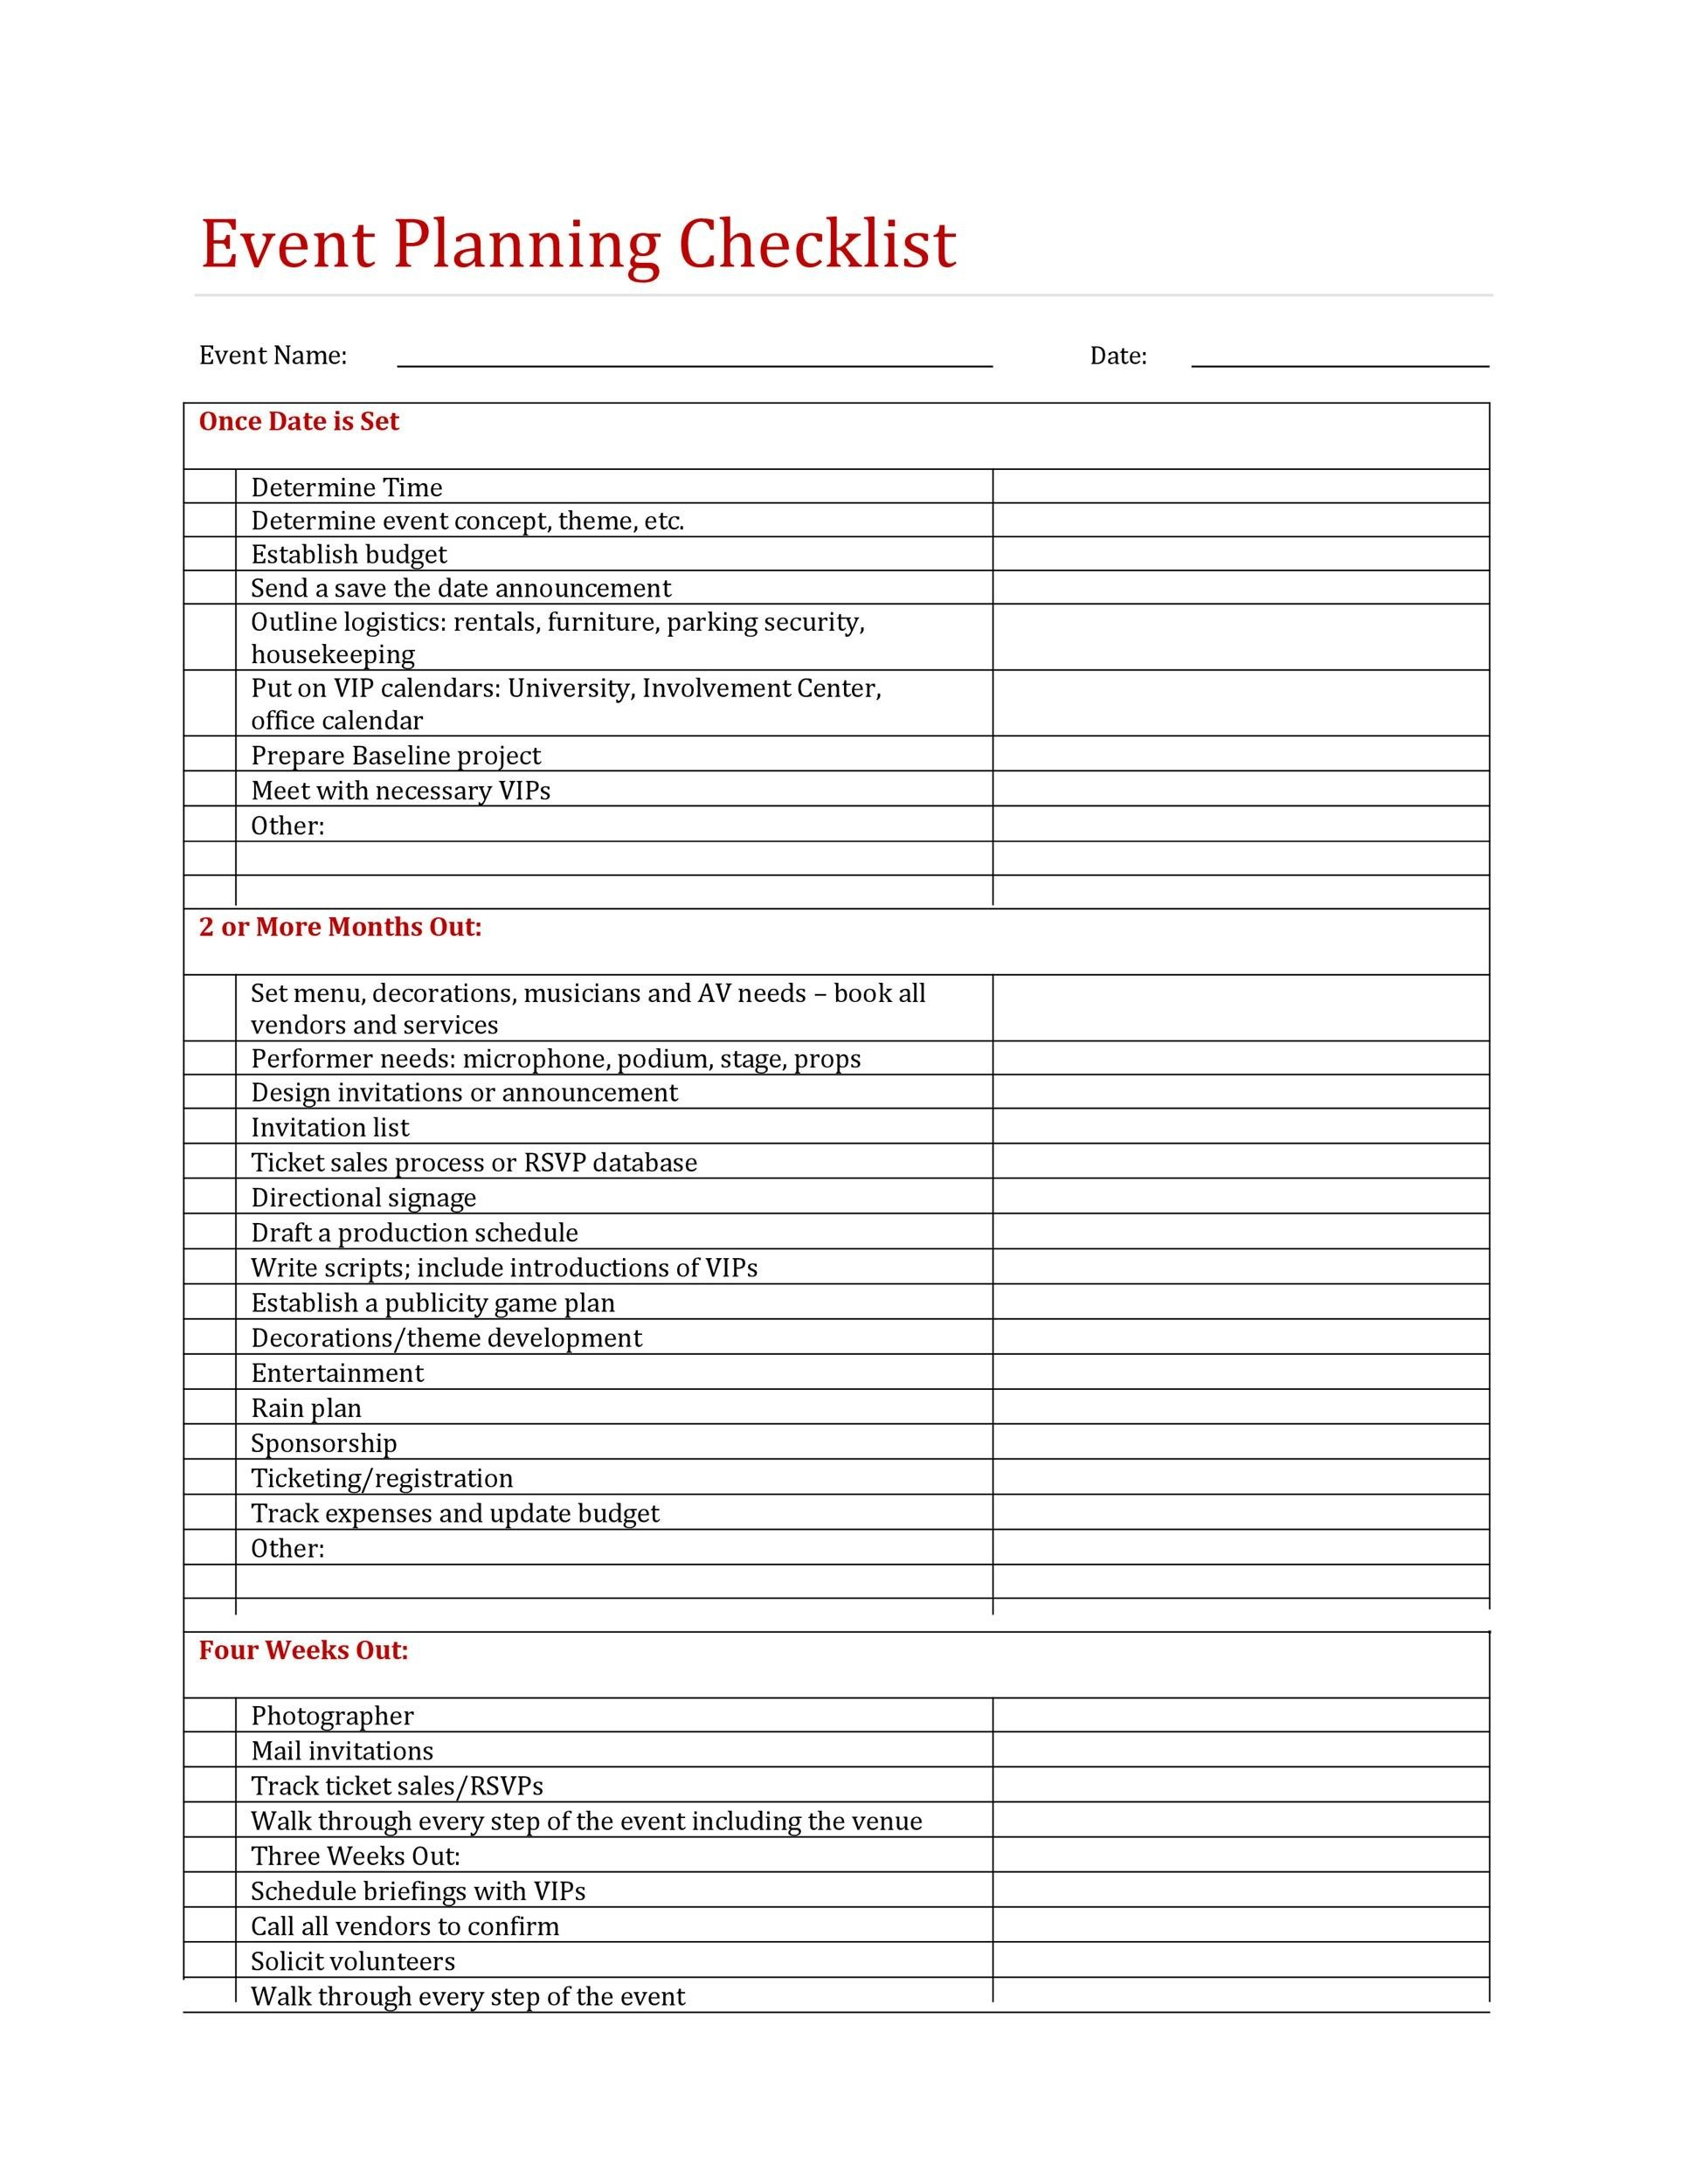 10 Professional Event Planning Checklist Templates ᐅ TemplateLab Intended For Event Management Checklist Template For Event Management Checklist Template